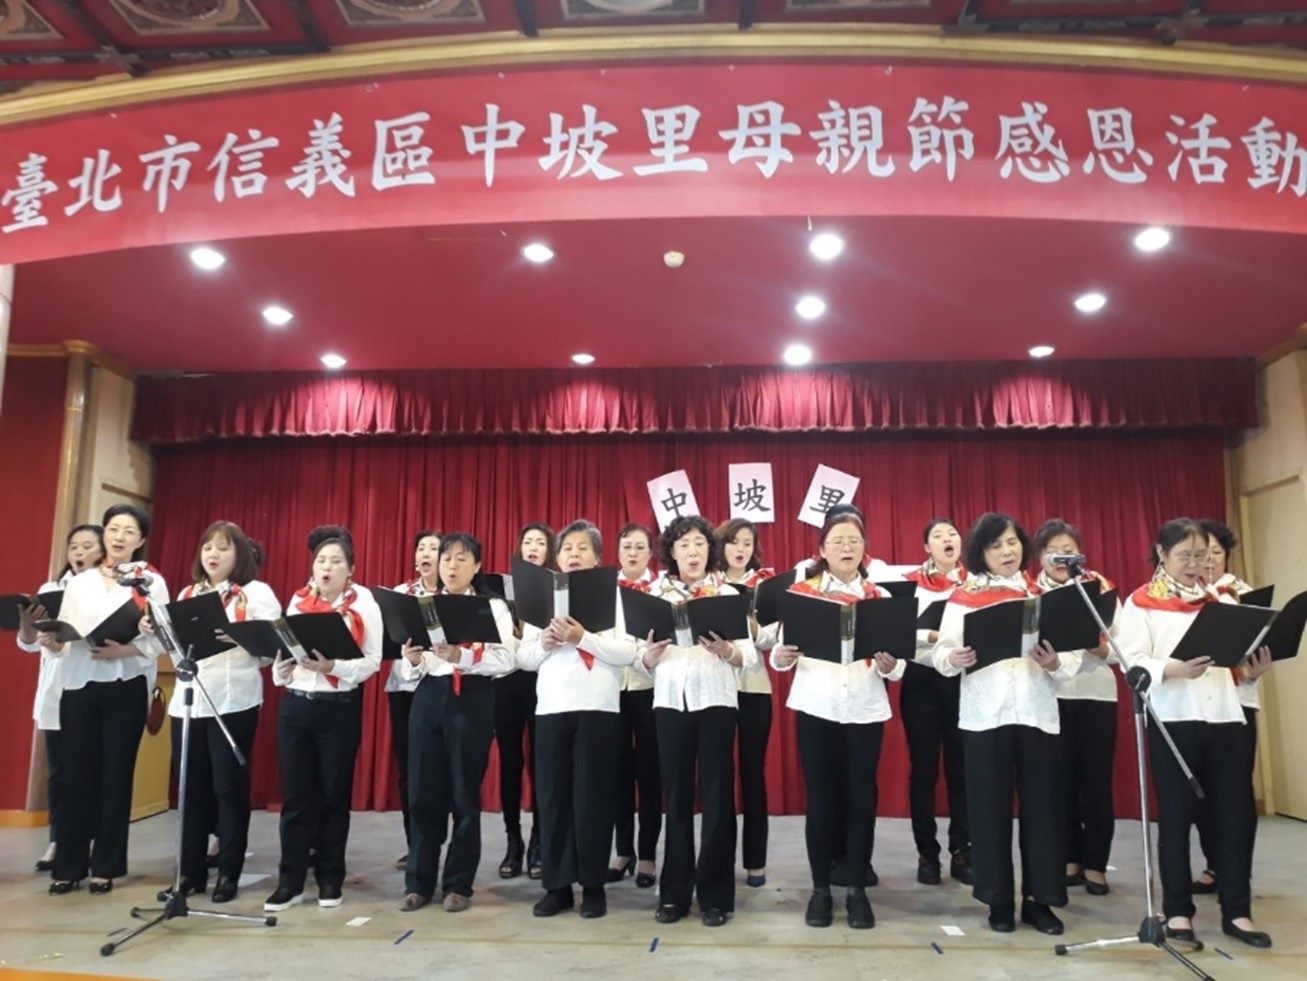 Xinyi Vocal Class performing the vocal show